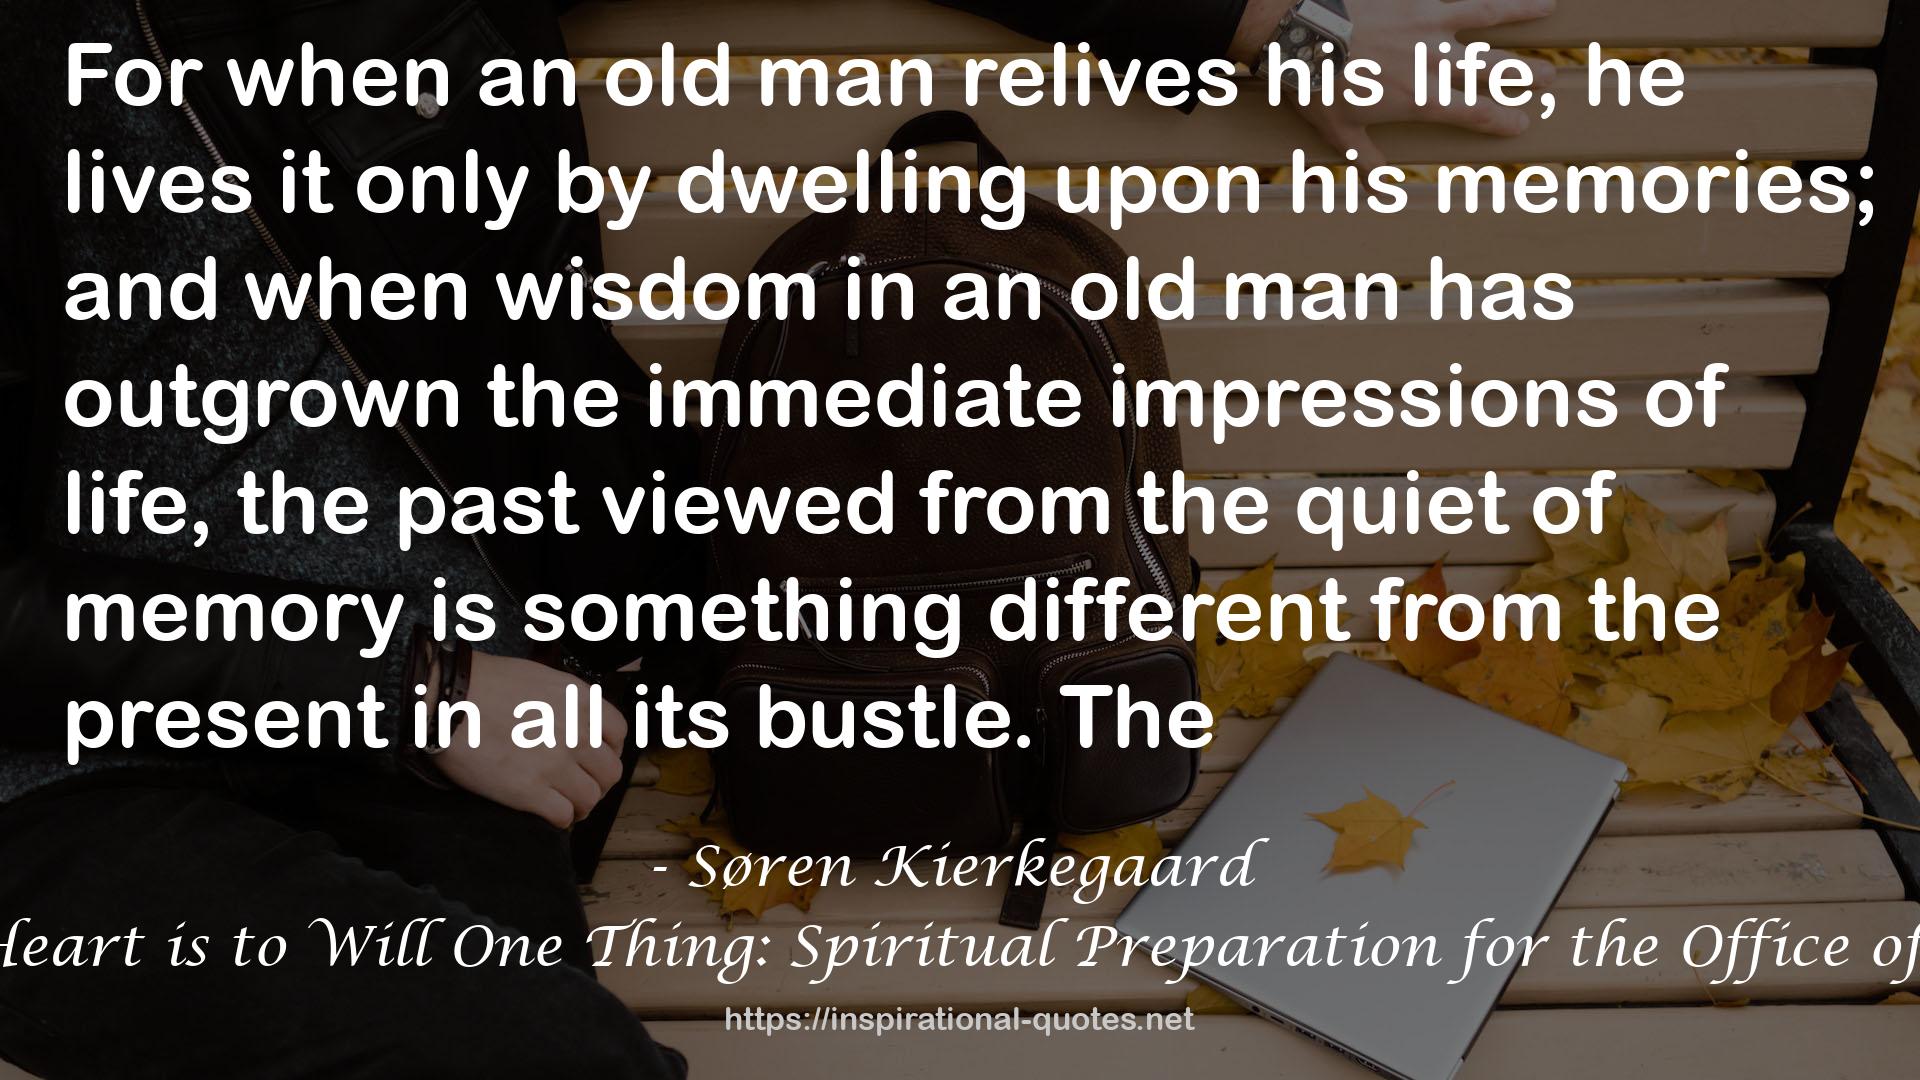 Purity of Heart is to Will One Thing: Spiritual Preparation for the Office of Confession QUOTES